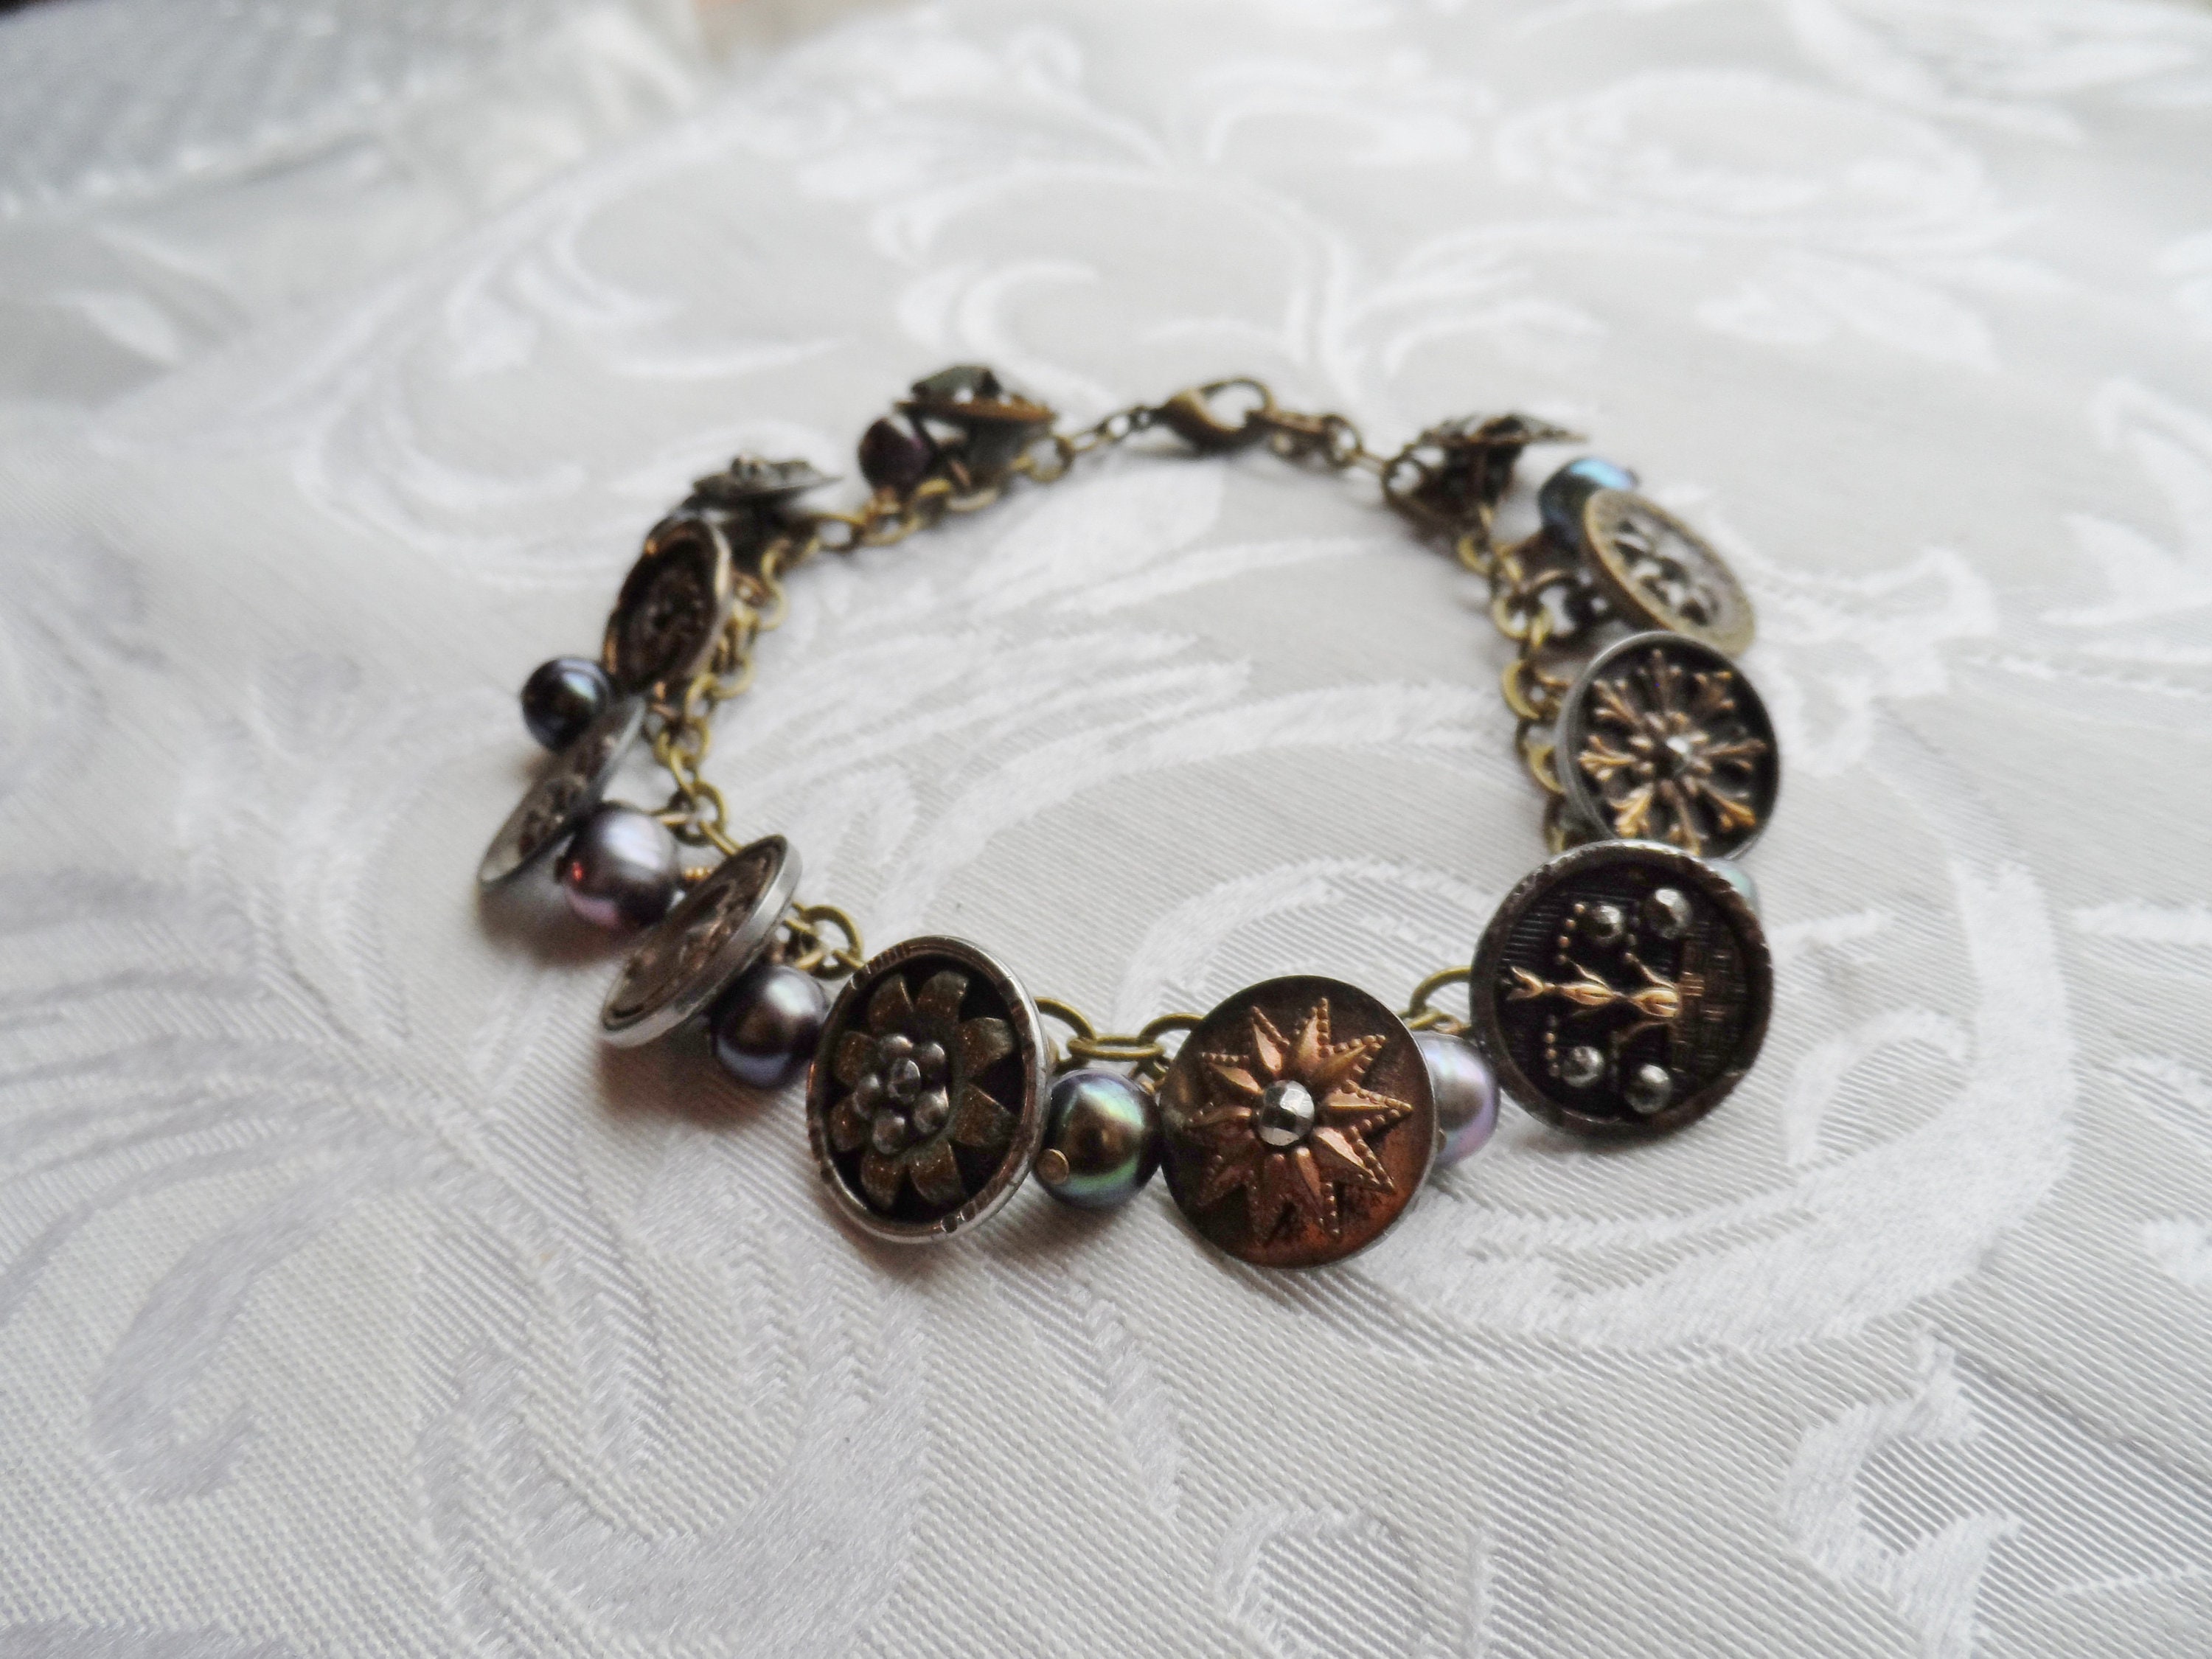 Buy Vintage Button Charm Bracelet With Burgundy Freshwater Pearls Online in  India 